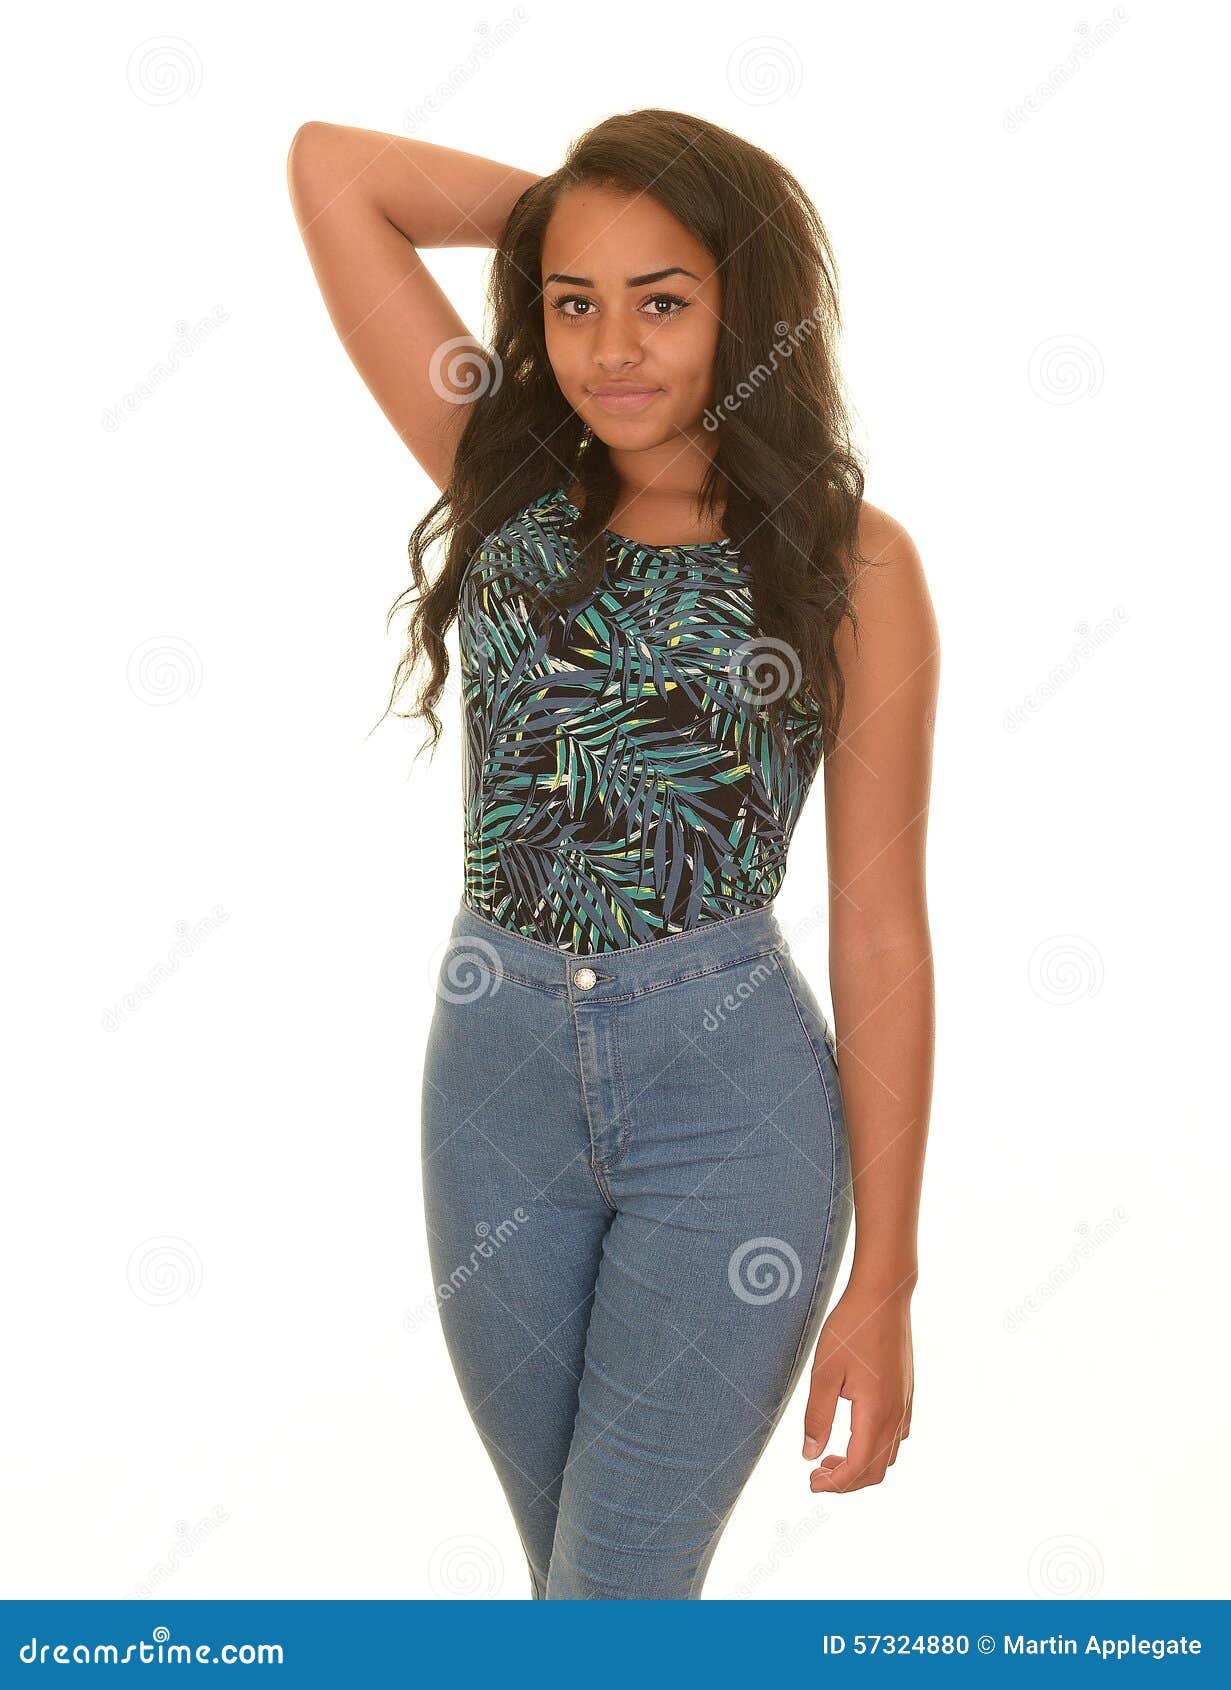 Pretty Athletic Woman Jeans Strikes Pose Stock Photo 467910761 |  Shutterstock